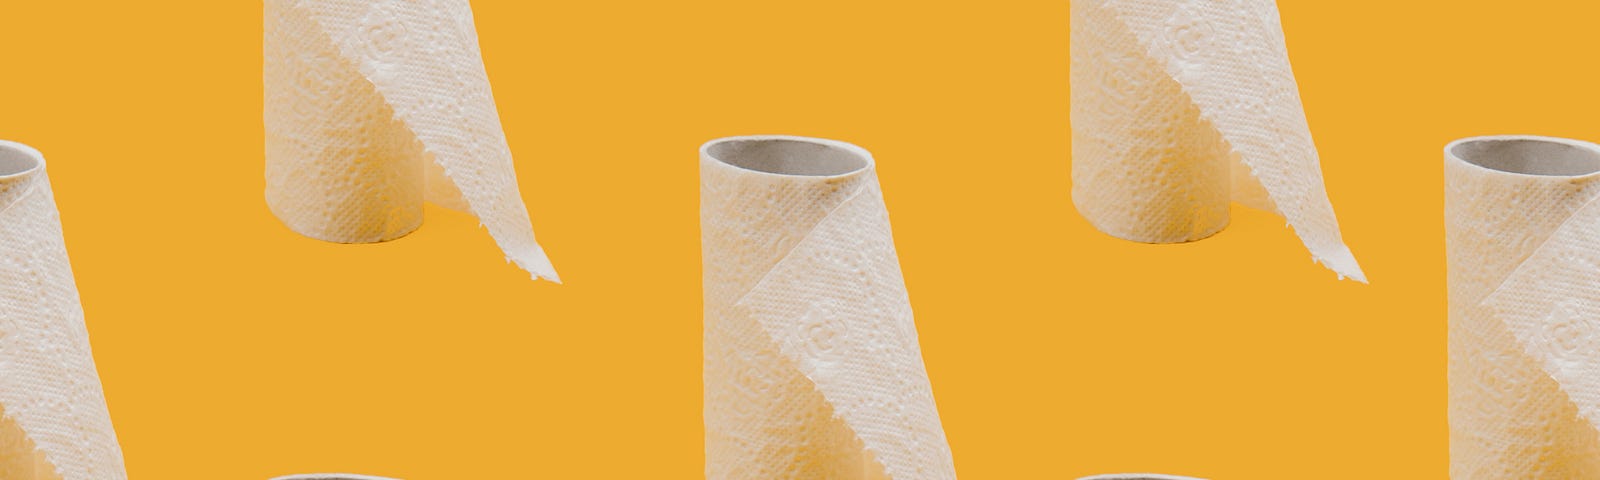 A marigold yellow background with repeated images of toilet paper rolls that are on its last legs